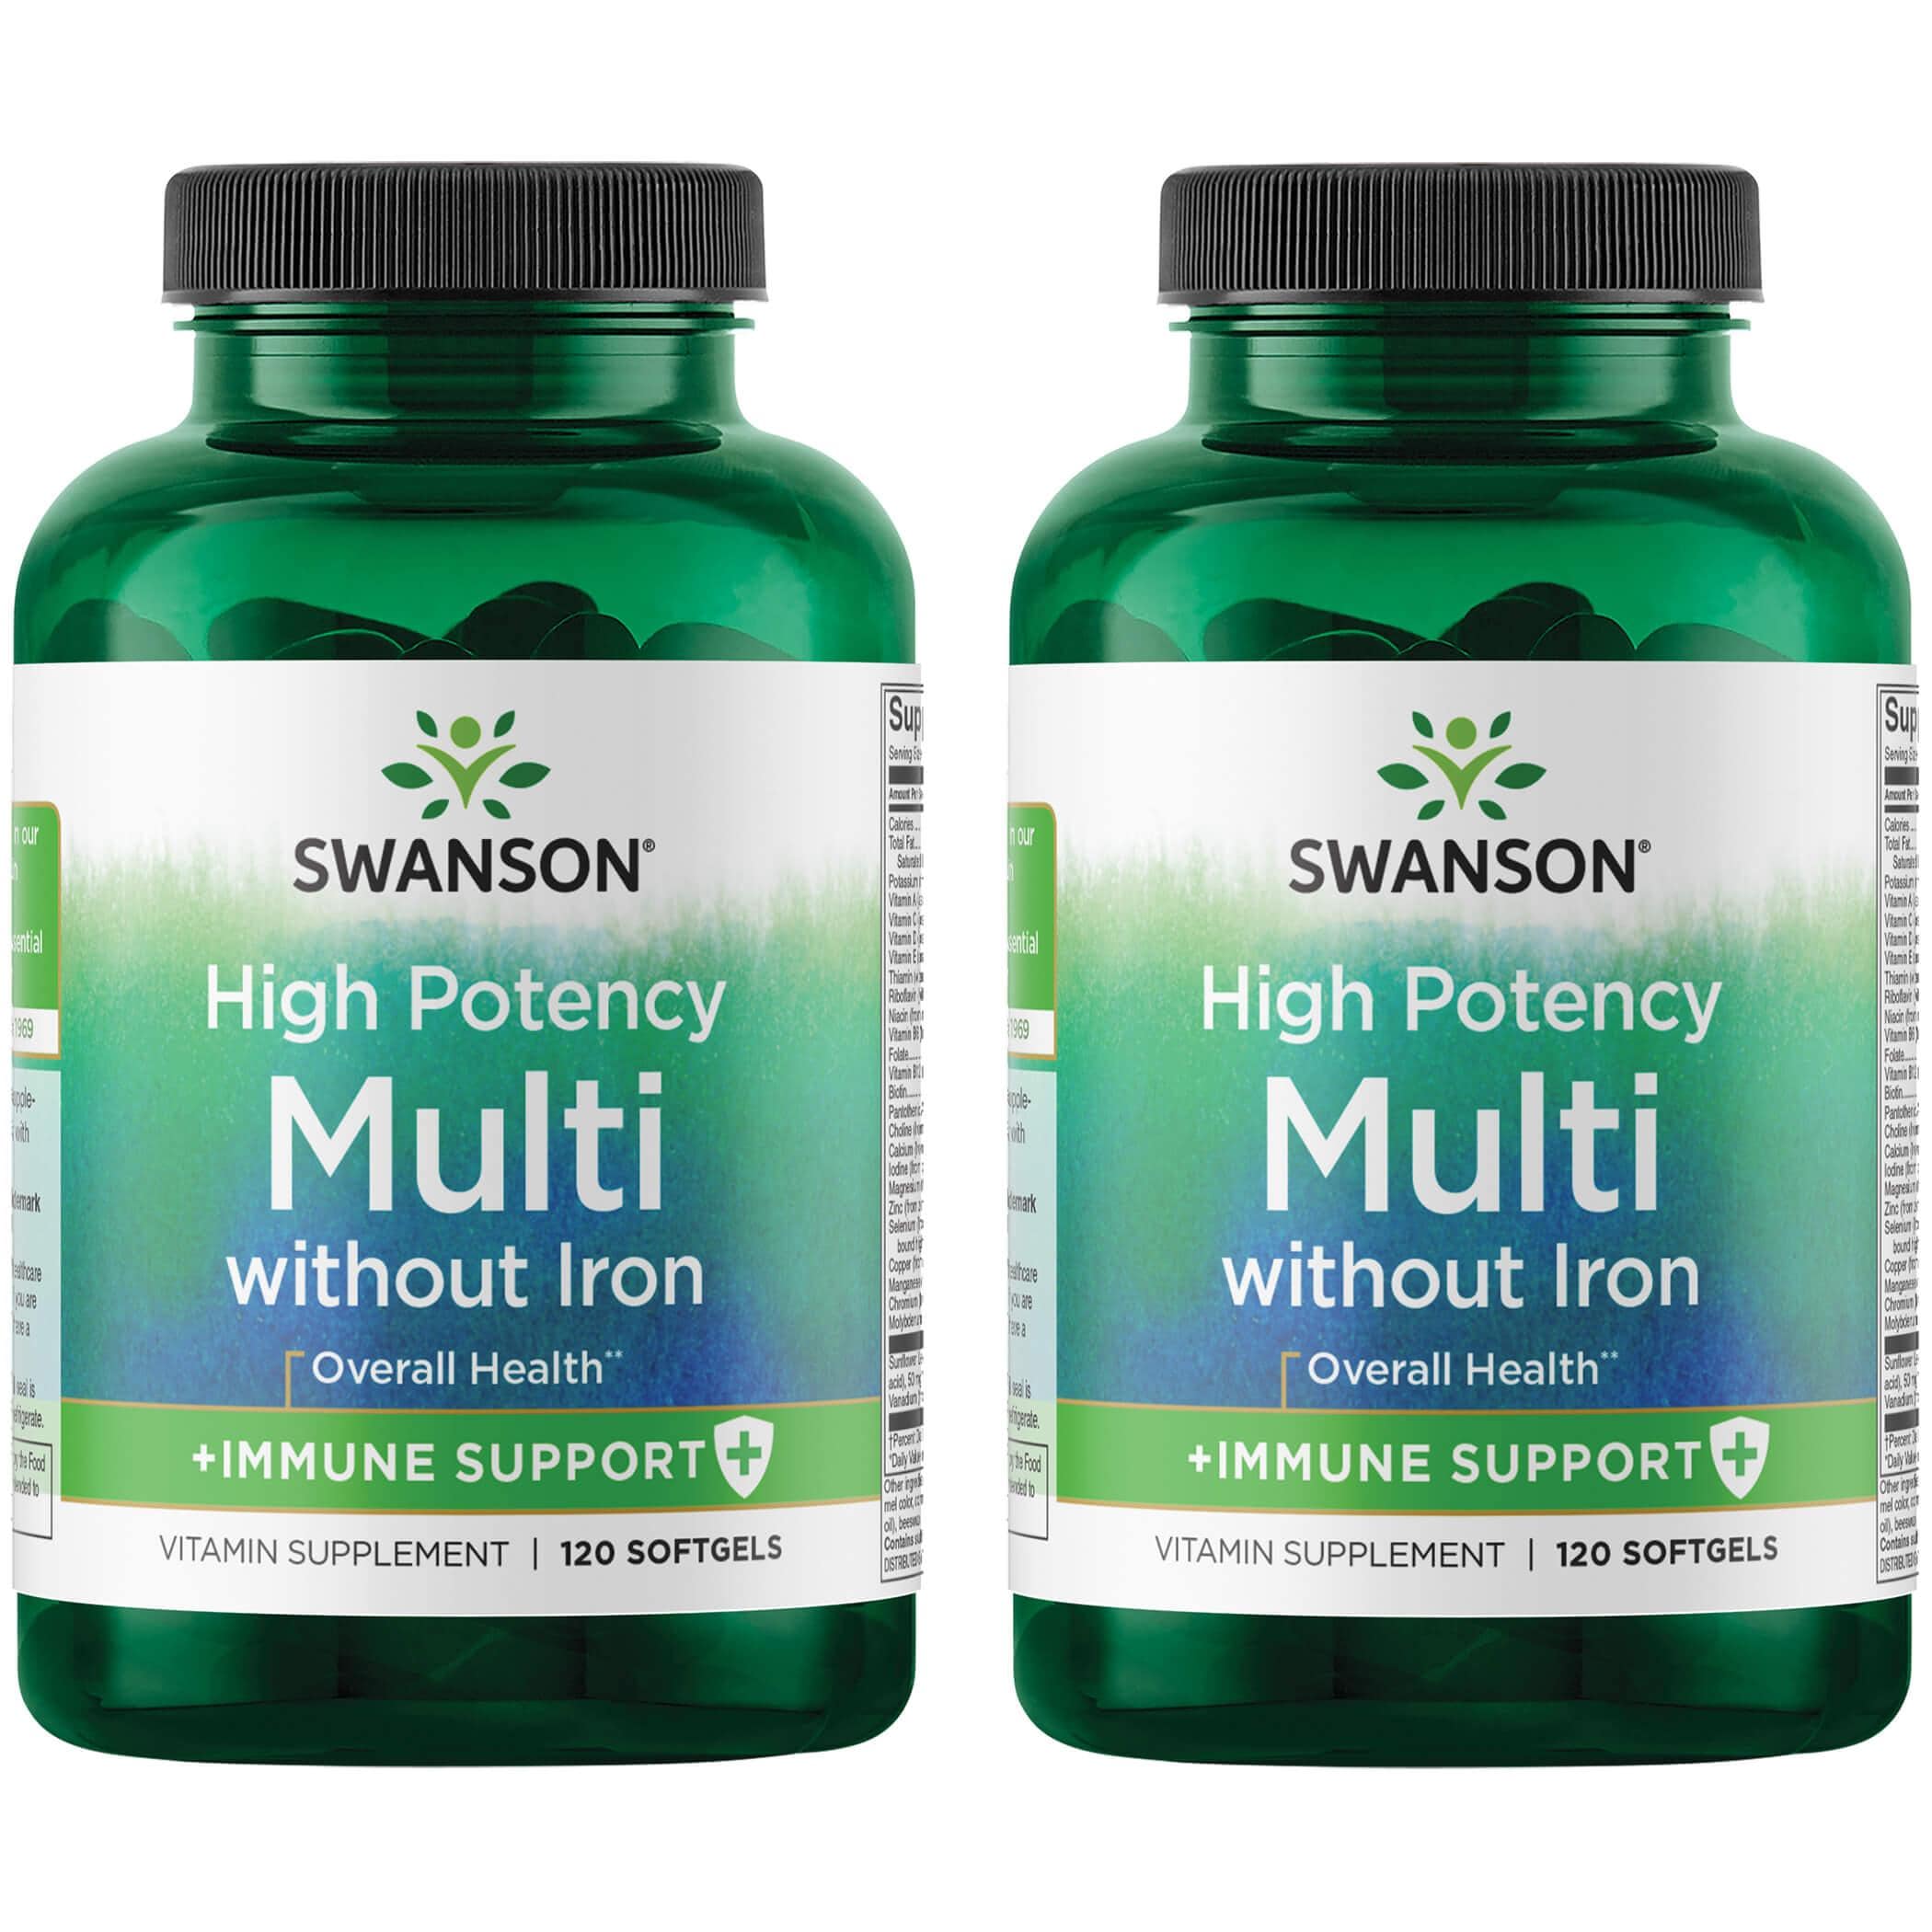 Swanson Premium High Potency Multi plus Immune Support - Without Iron 2 Pack Vitamin 120 Soft Gels